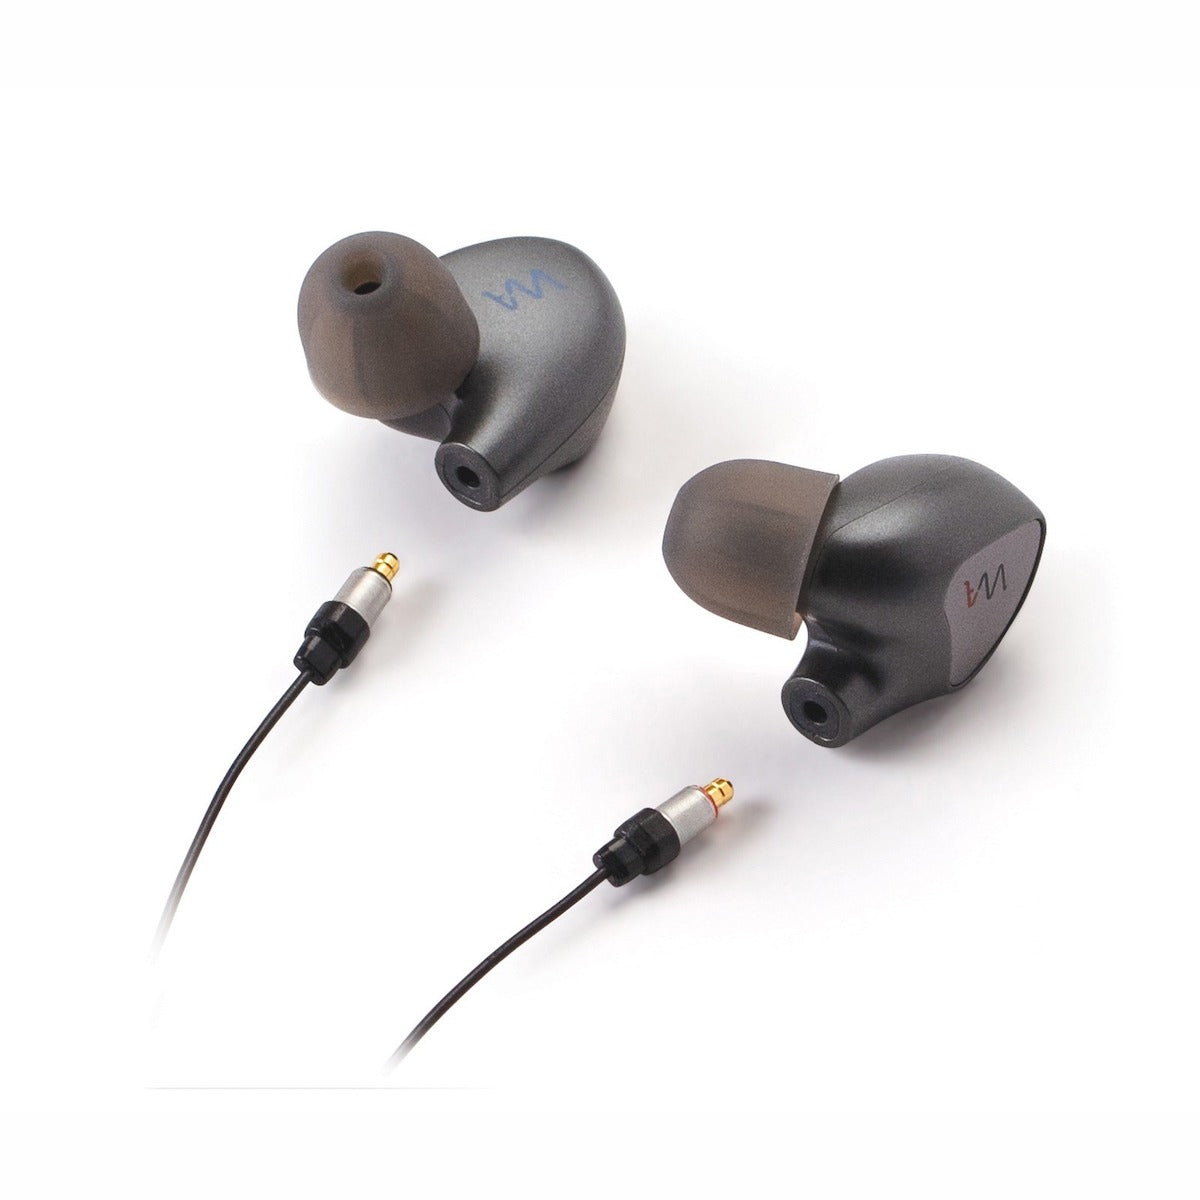 Westone MACH 30 - 3-driver Universal In-ear Monitors, T2 connector